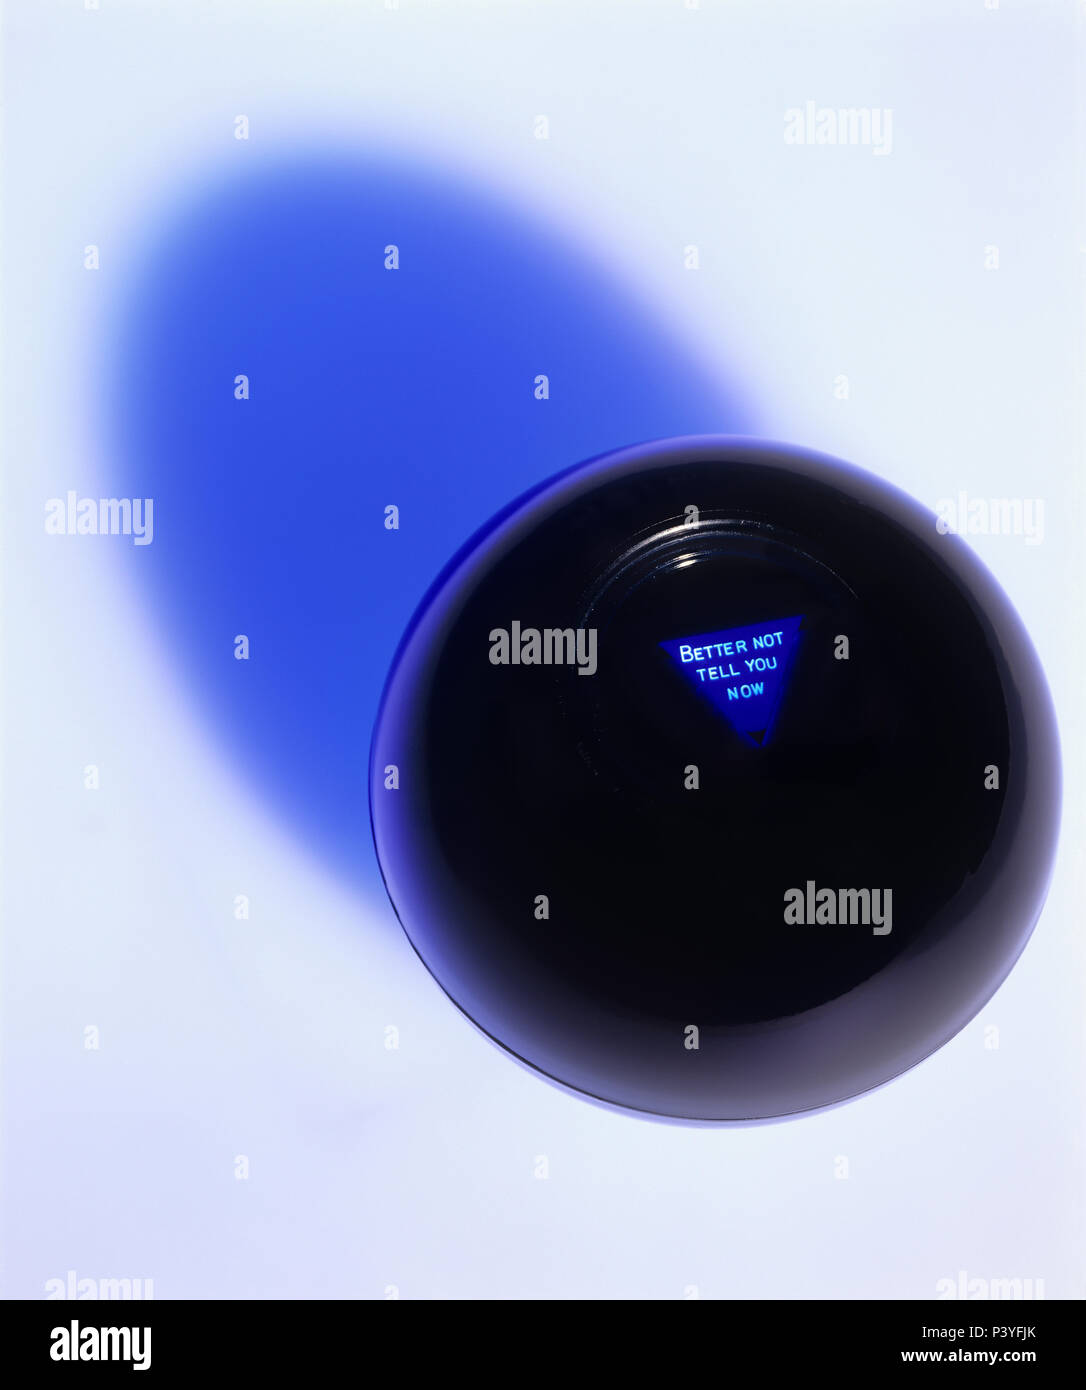 Magic 8 Ball Images – Browse 2,682 Stock Photos, Vectors, and